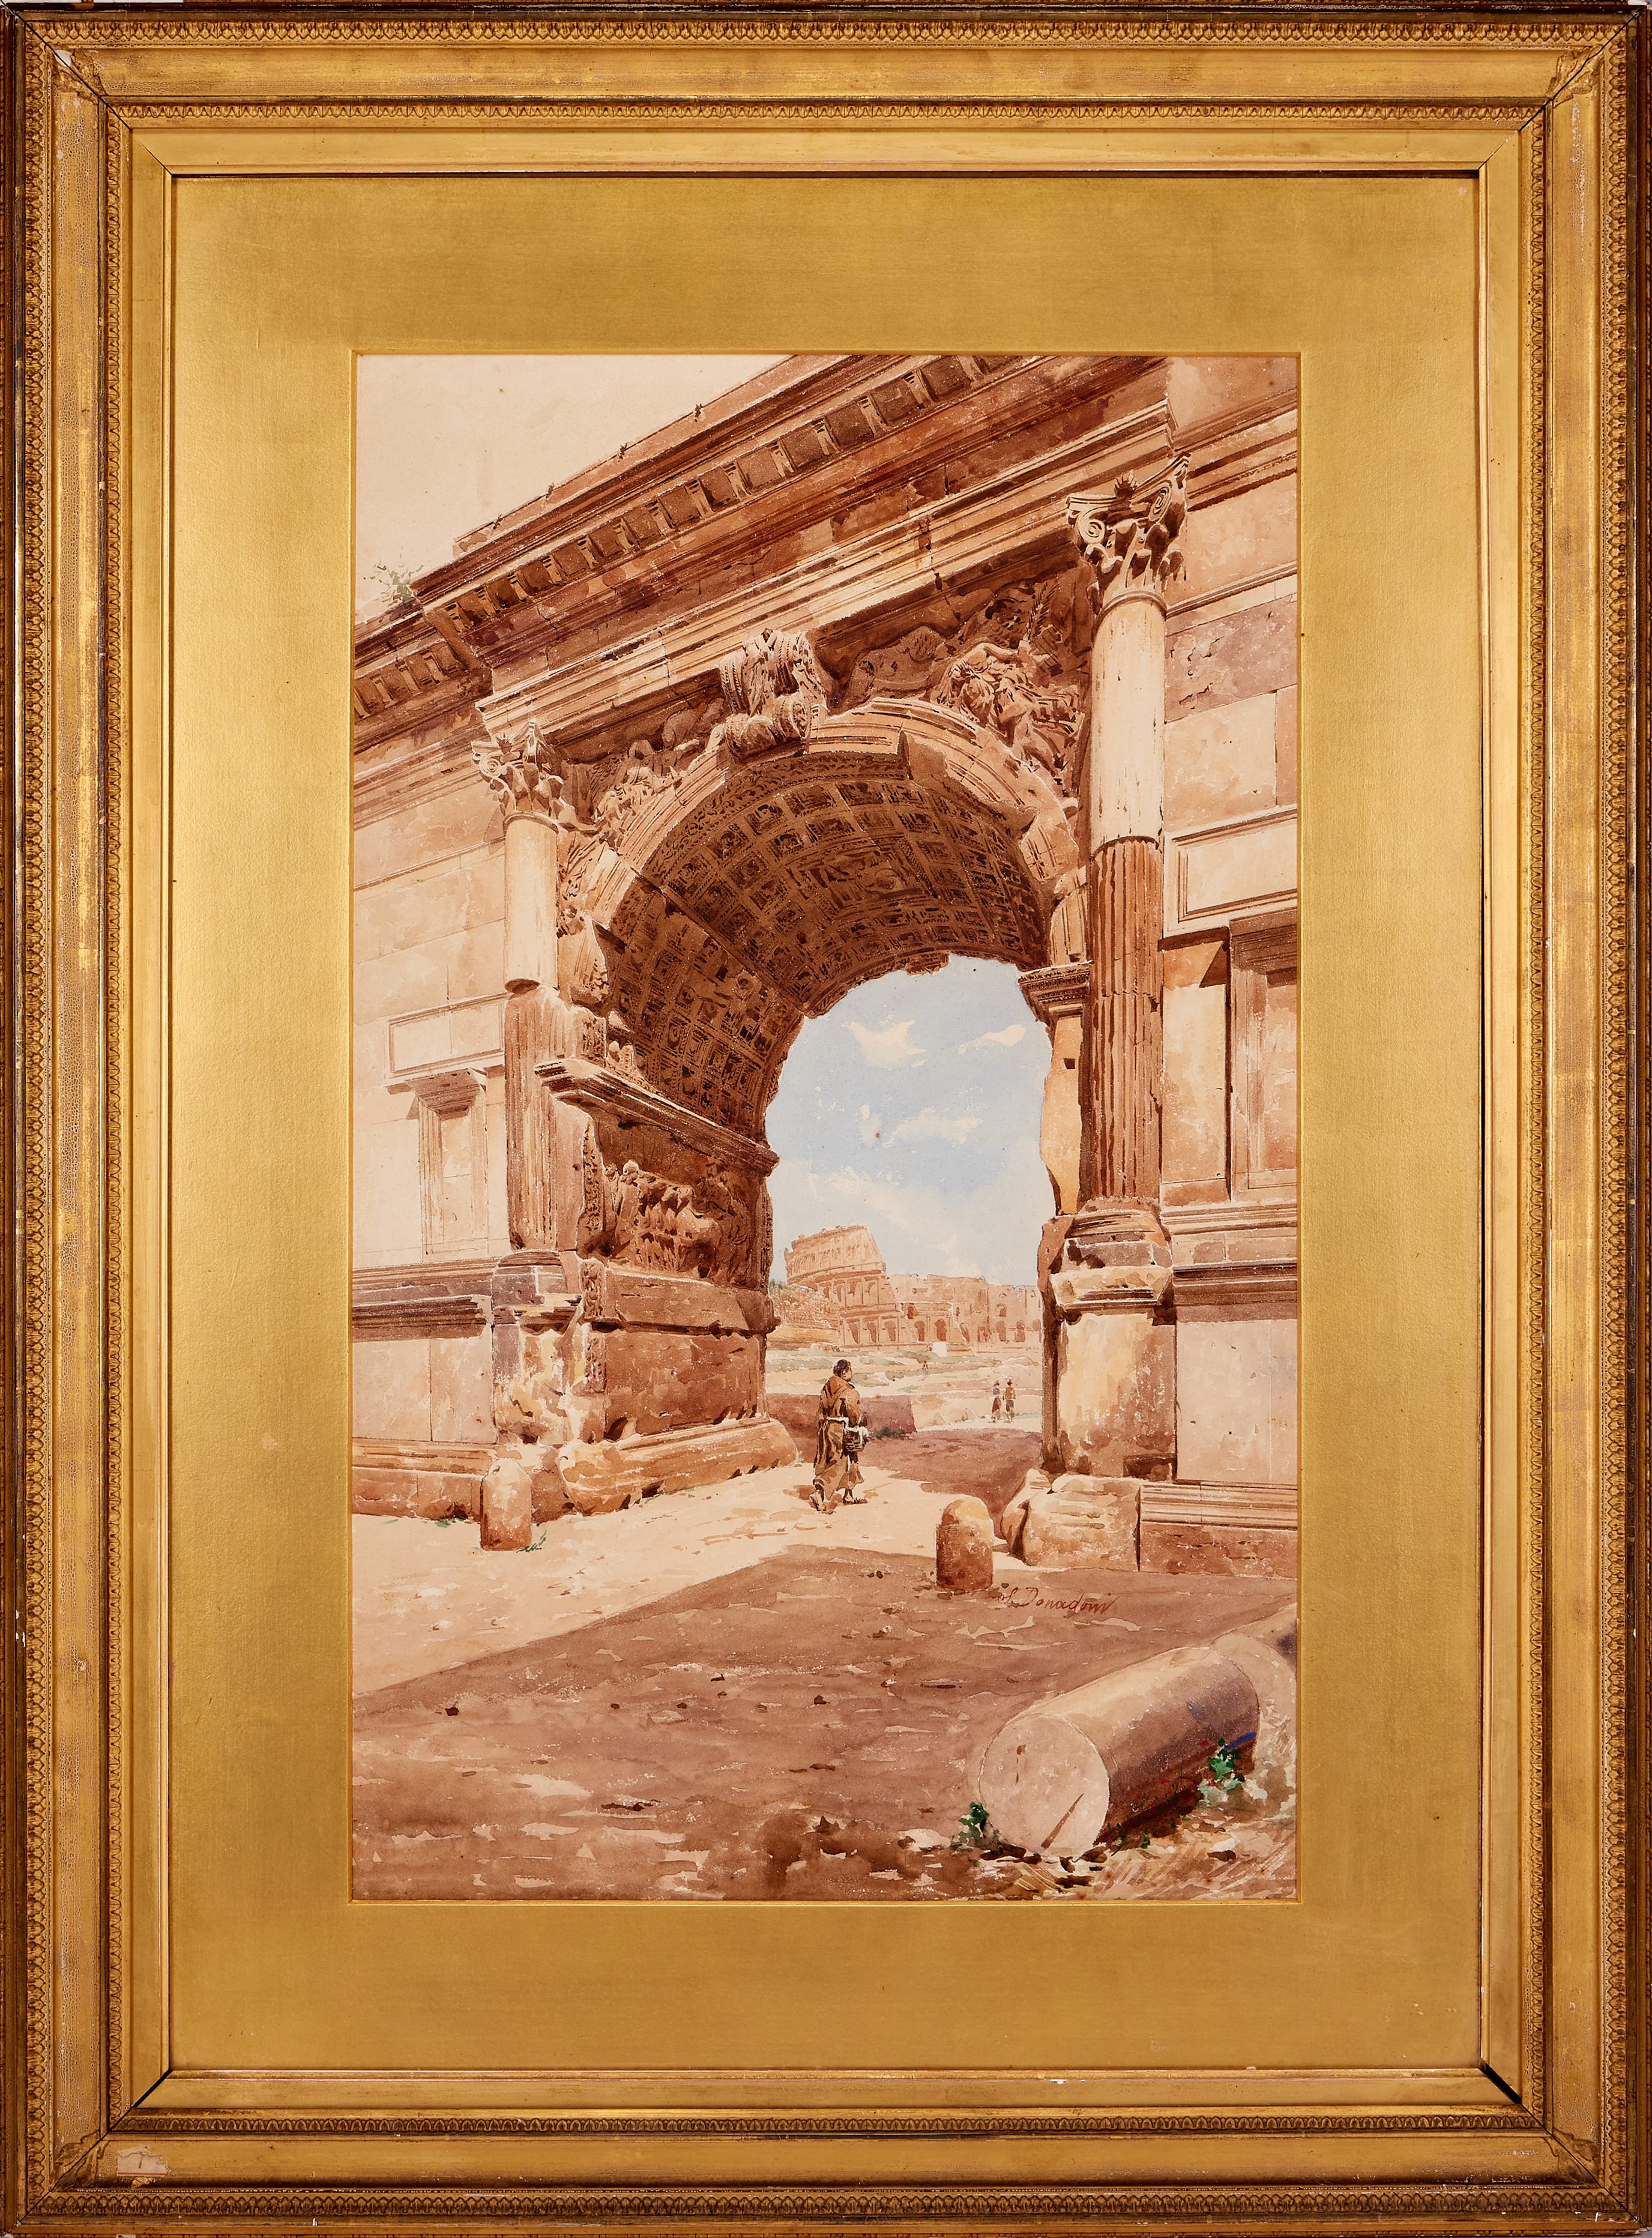 Stefano Donadoni (Italy, 1844-1911) The Arch of Titus with the Colosseum in the background